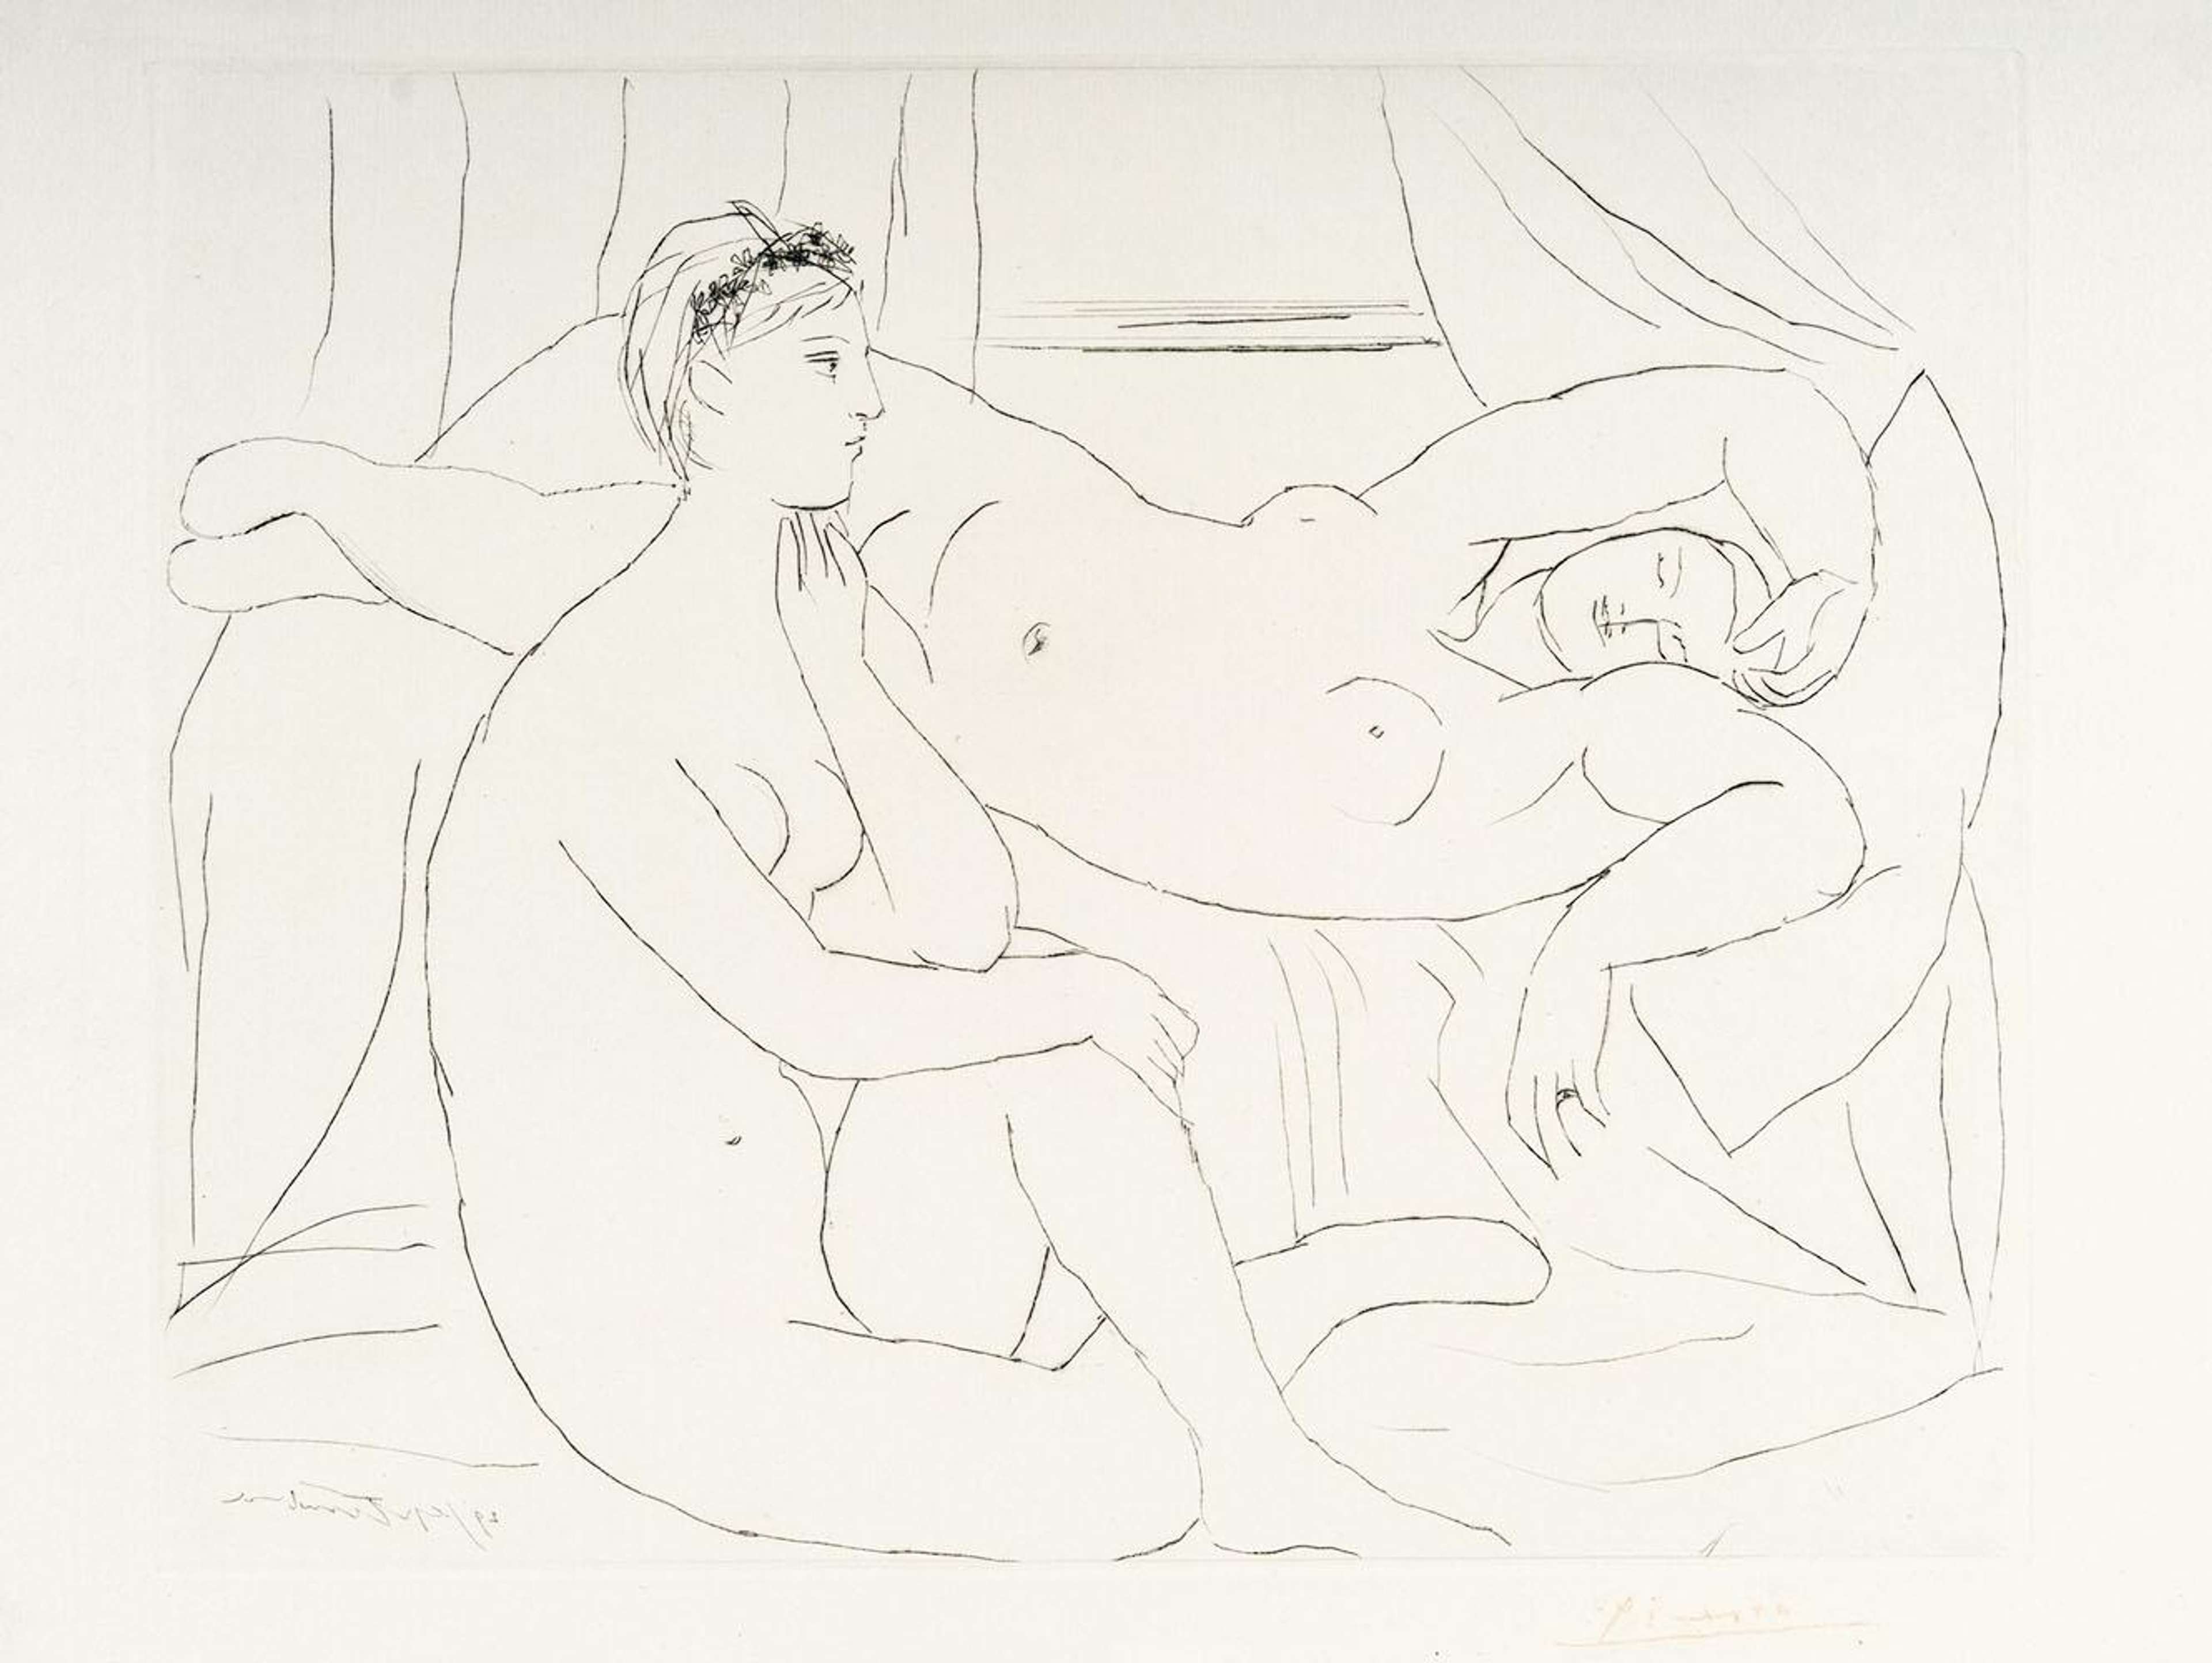 An image of the monochrome print Deux Femmes Se Reposant by Pablo Picasso, showing two nude females resting on a bed.